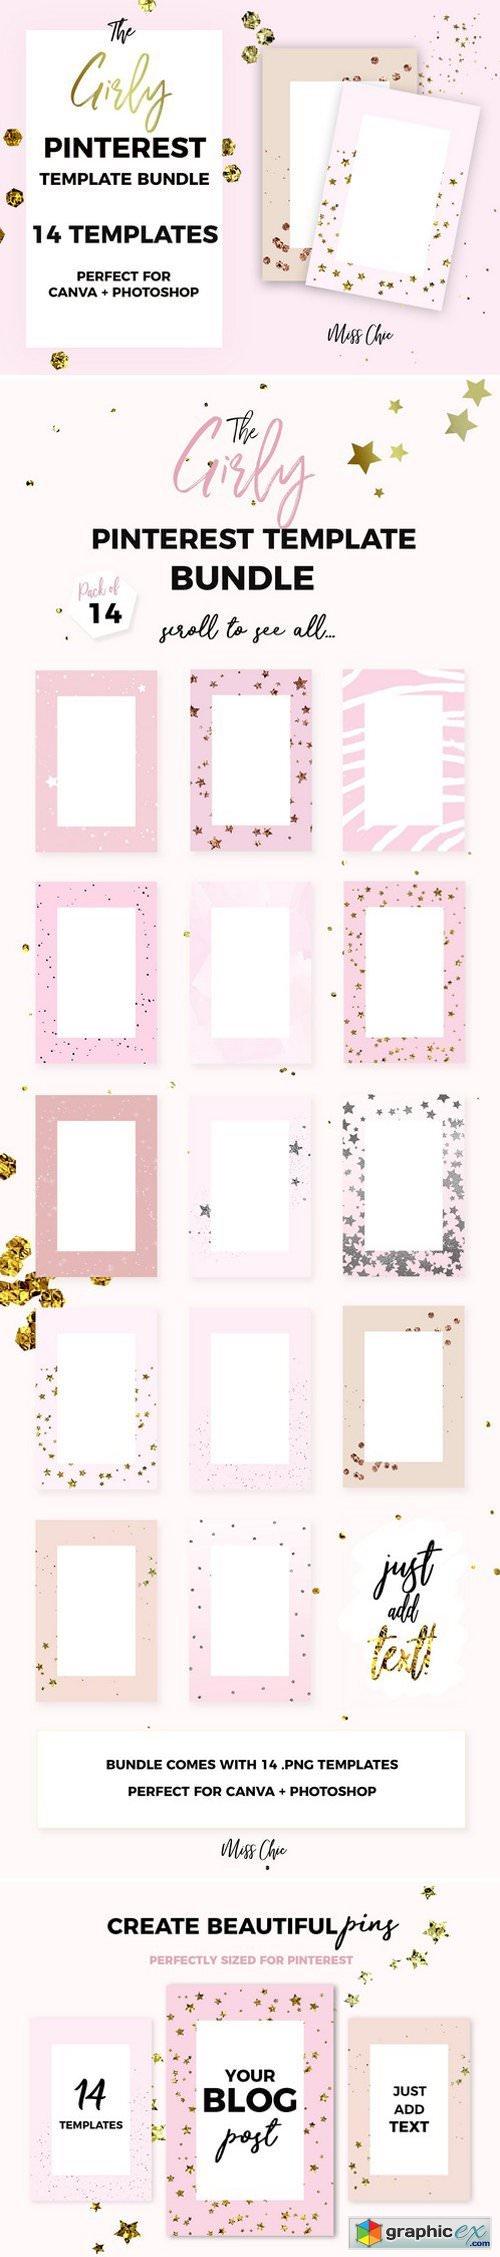 The Girly Pinterest Template Bundle